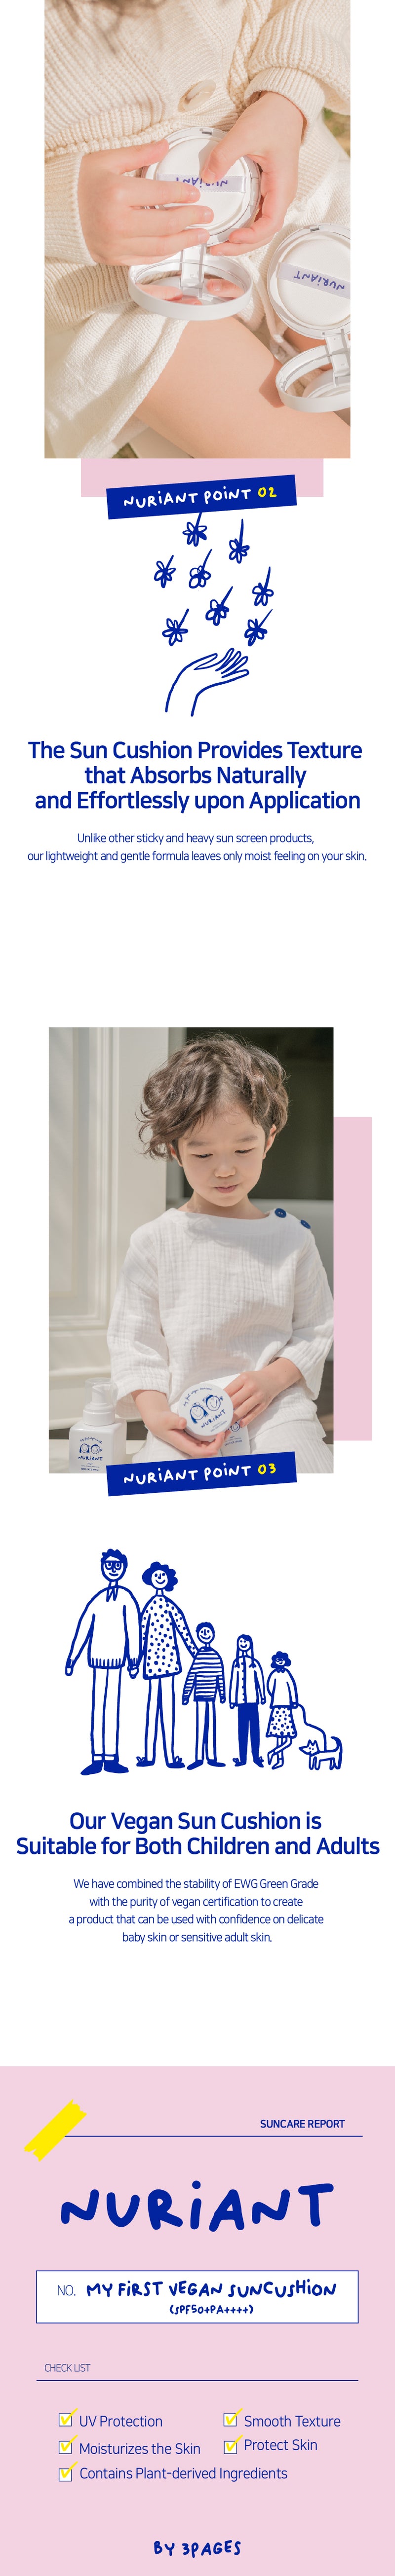 Nuriant by 3pages®- My First Vegan Kids Sun Block Cushion + Refill (SPF50+ PA++++)